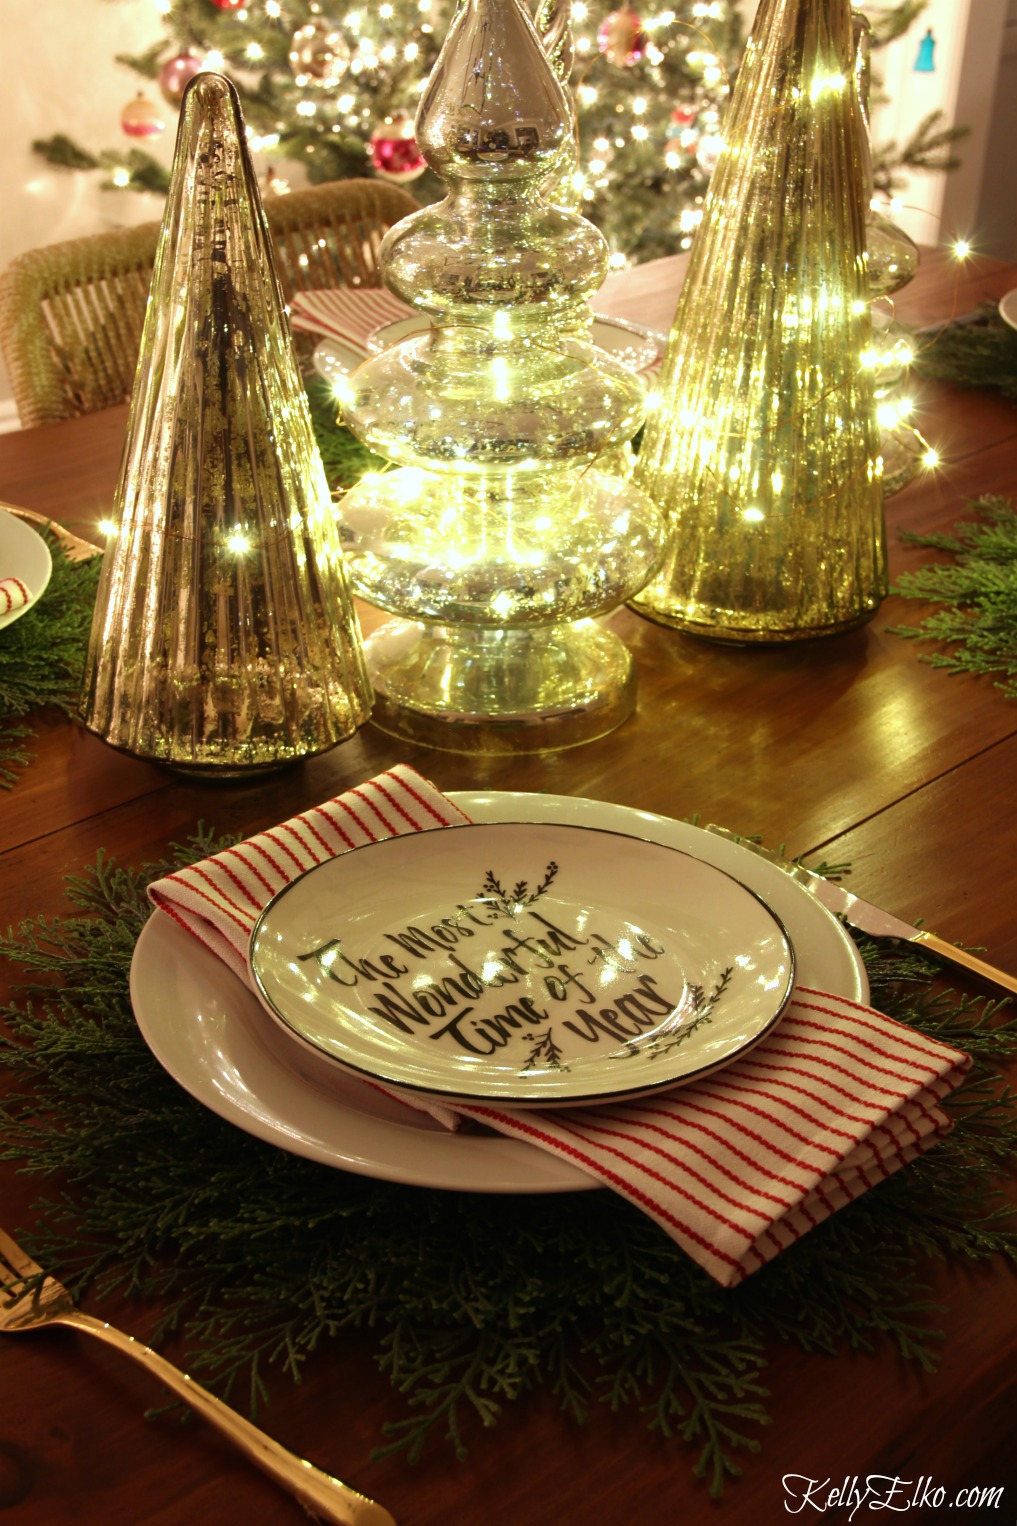 Christmas Nights Tour - see 25 of the best Christmas homes lit up at night! Love this mercury glass centerpiece kellyelko.com #christmas #christmasdecorating #christmasdecor #christmaslights